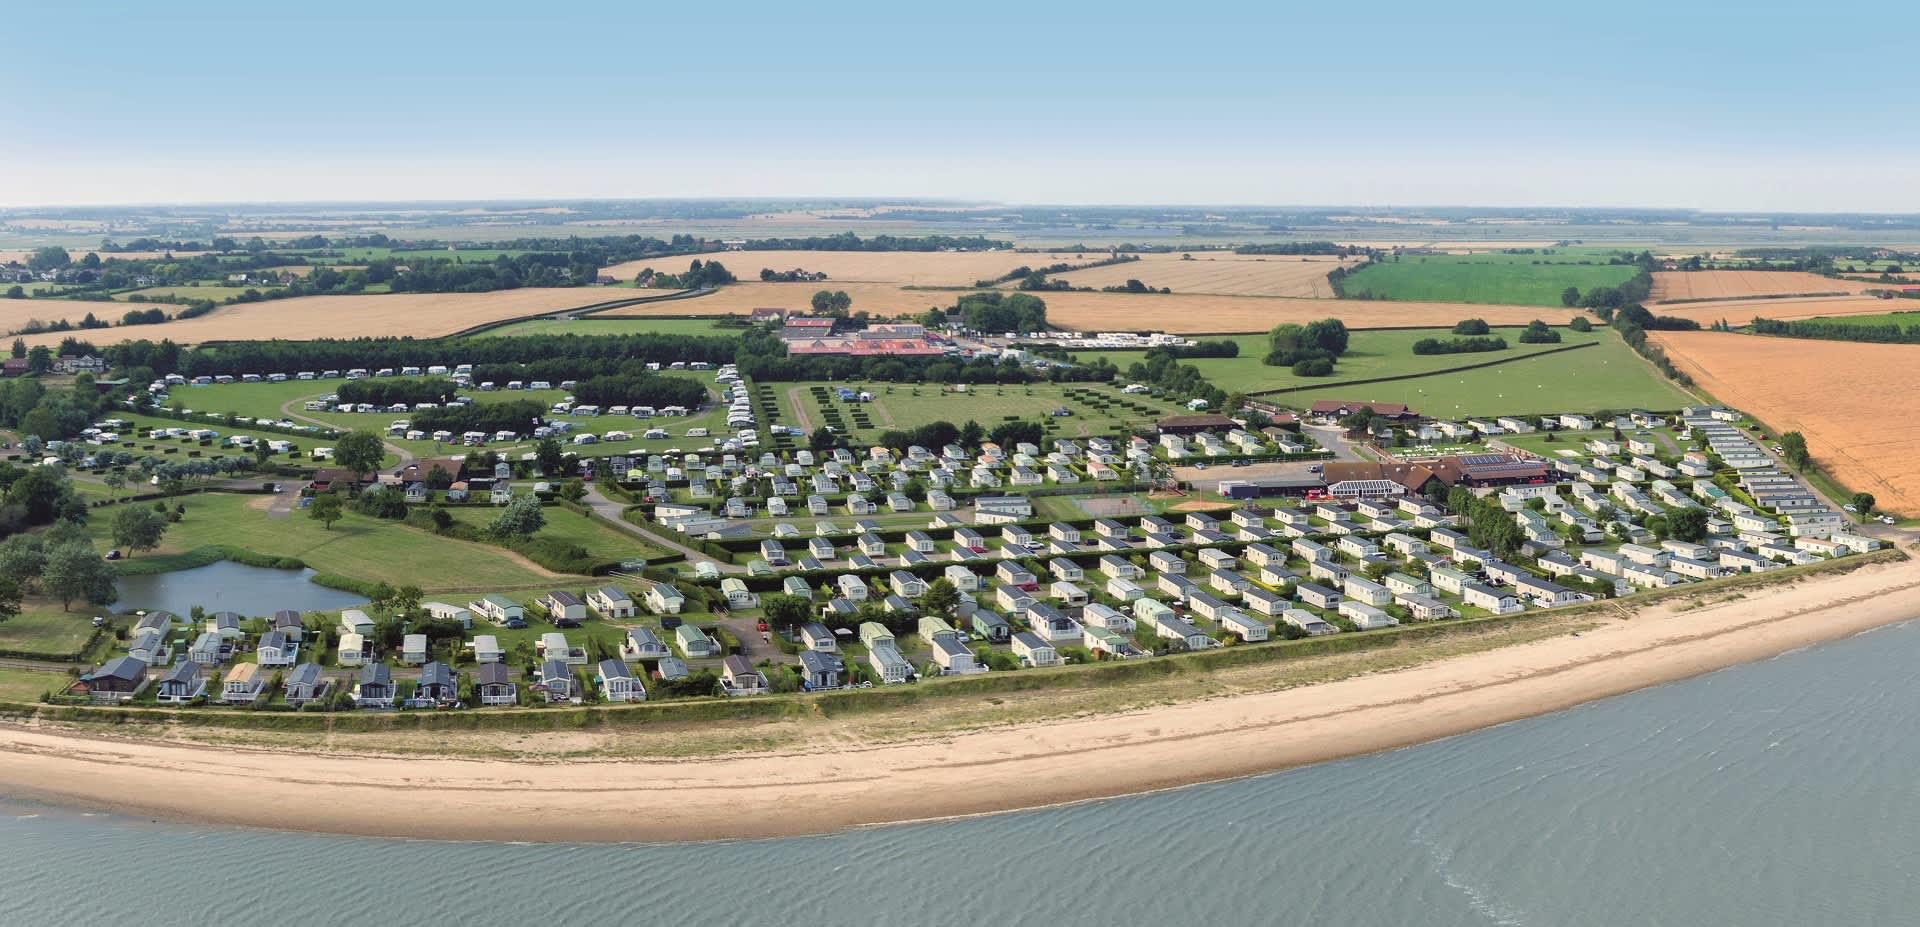 Aerial view of Waldegraves Holiday Park showing holiday homes by the beach